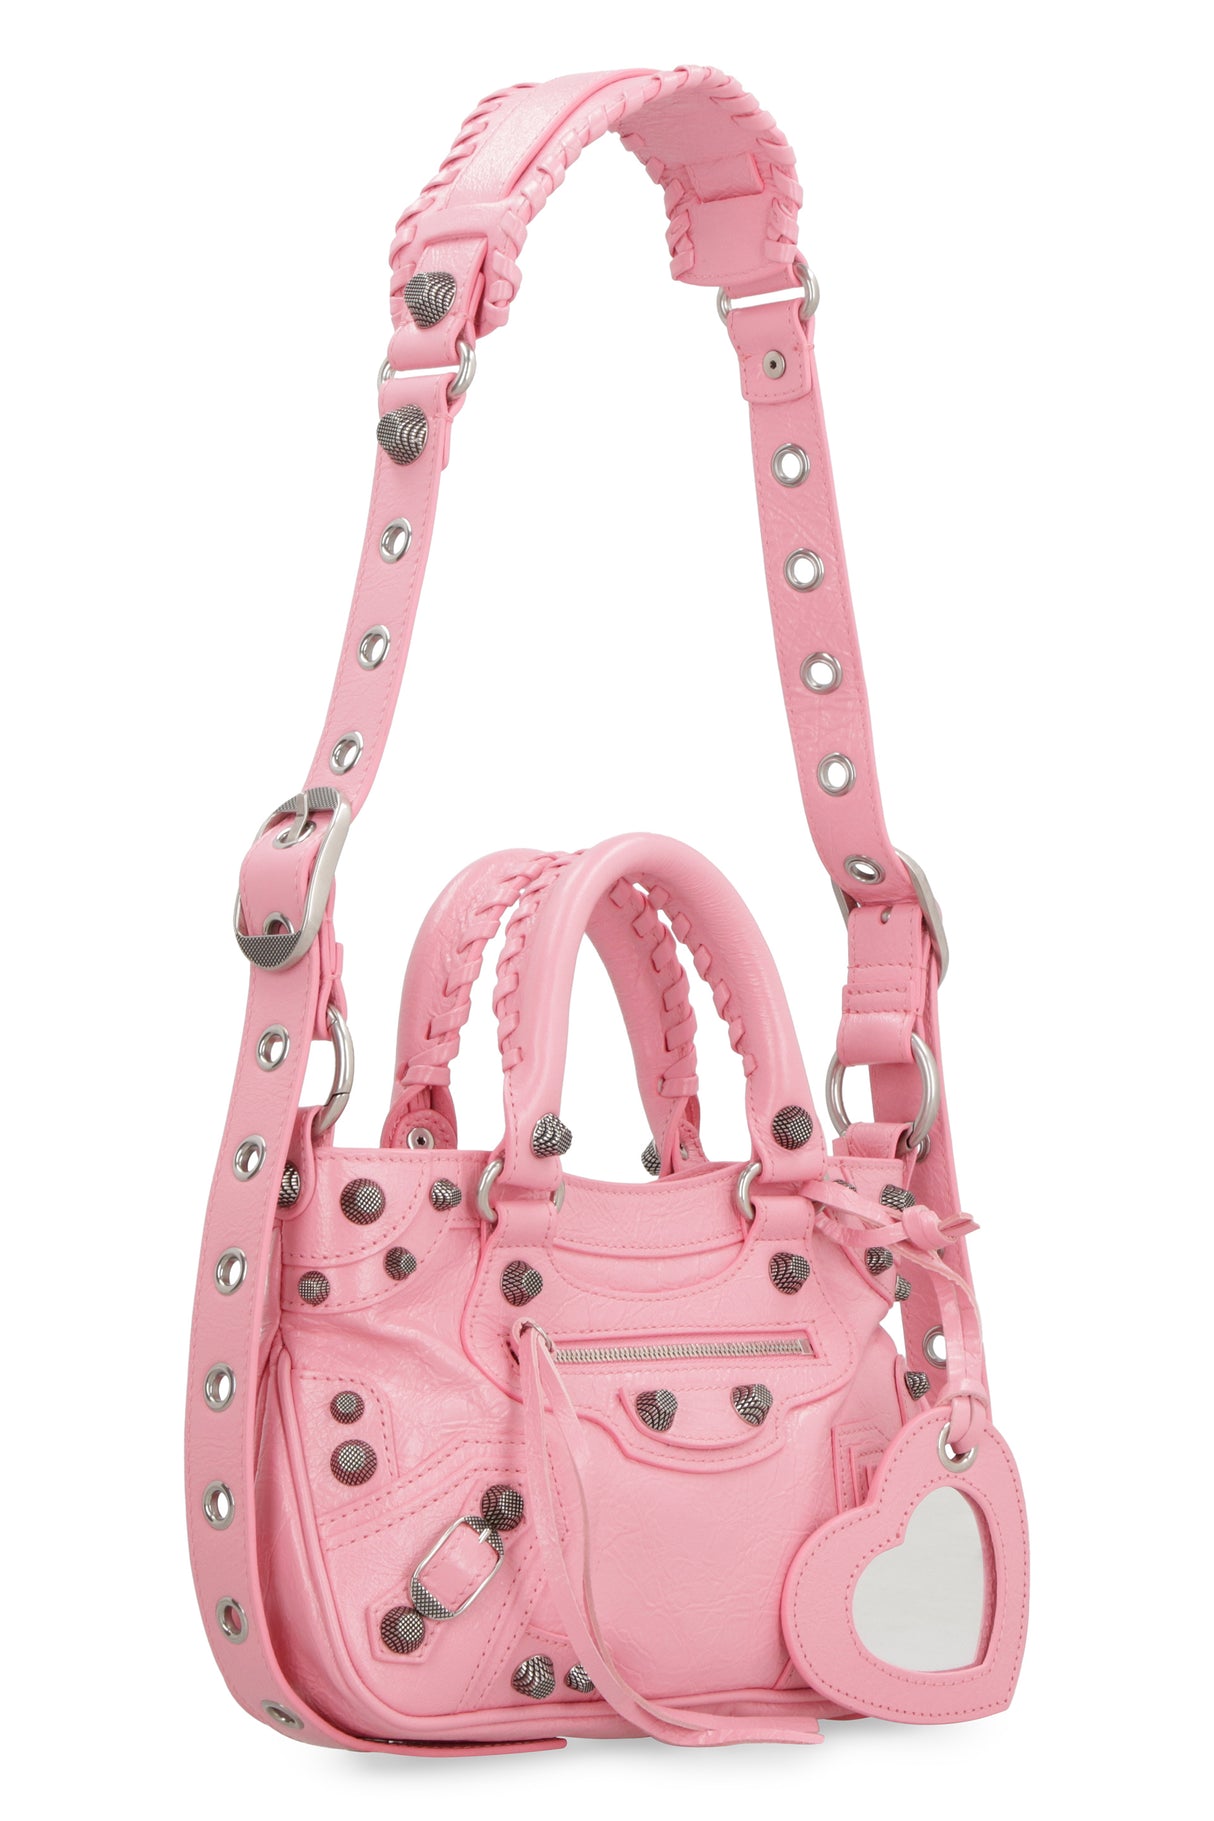 BALENCIAGA Pink Leather Tote Handbag with Metal Studs and Buckles for Women